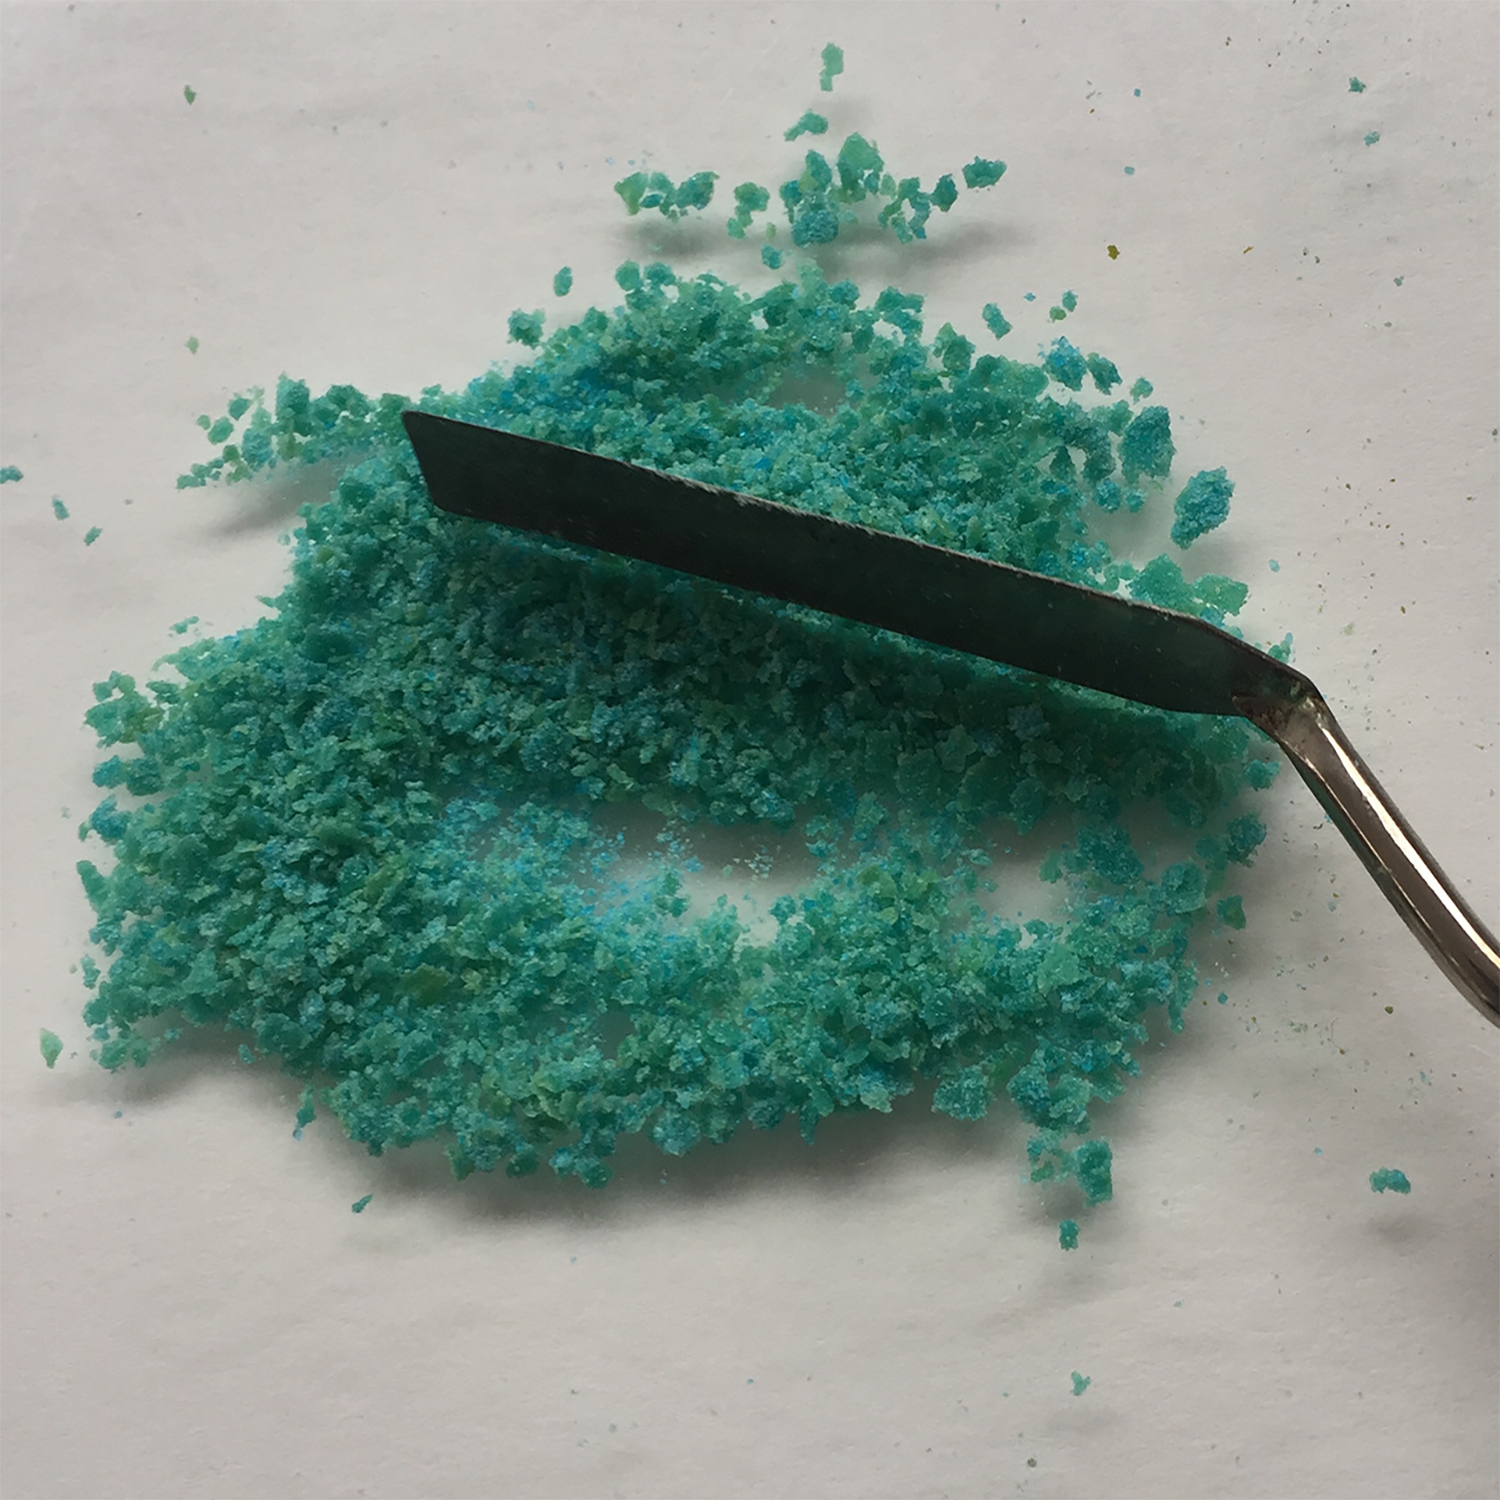 Once dried, the pigment is ready to be bottled